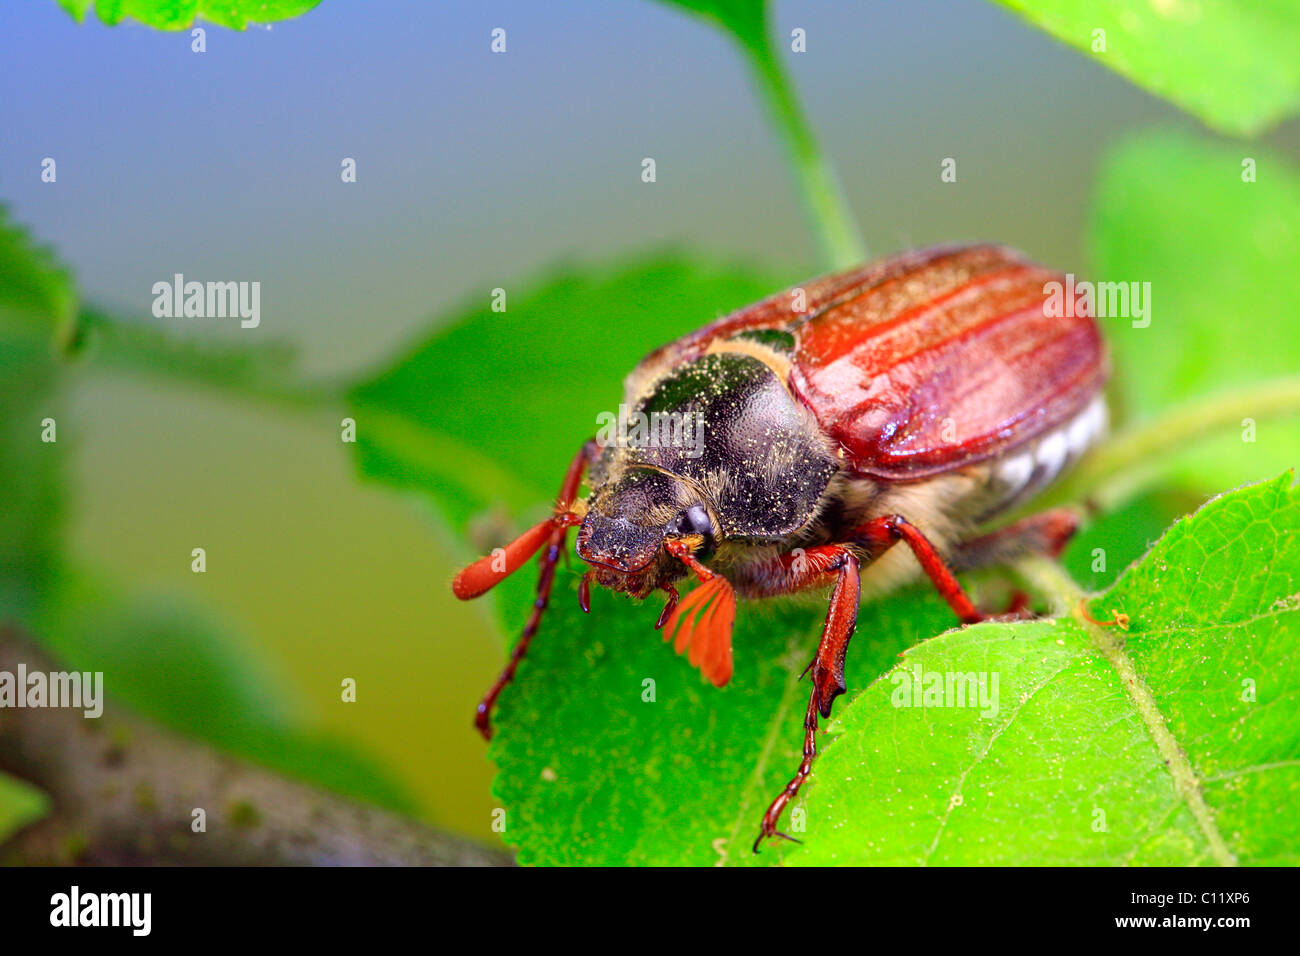 May bug or Cockchafer (Melolontha melolontha) Stock Photo